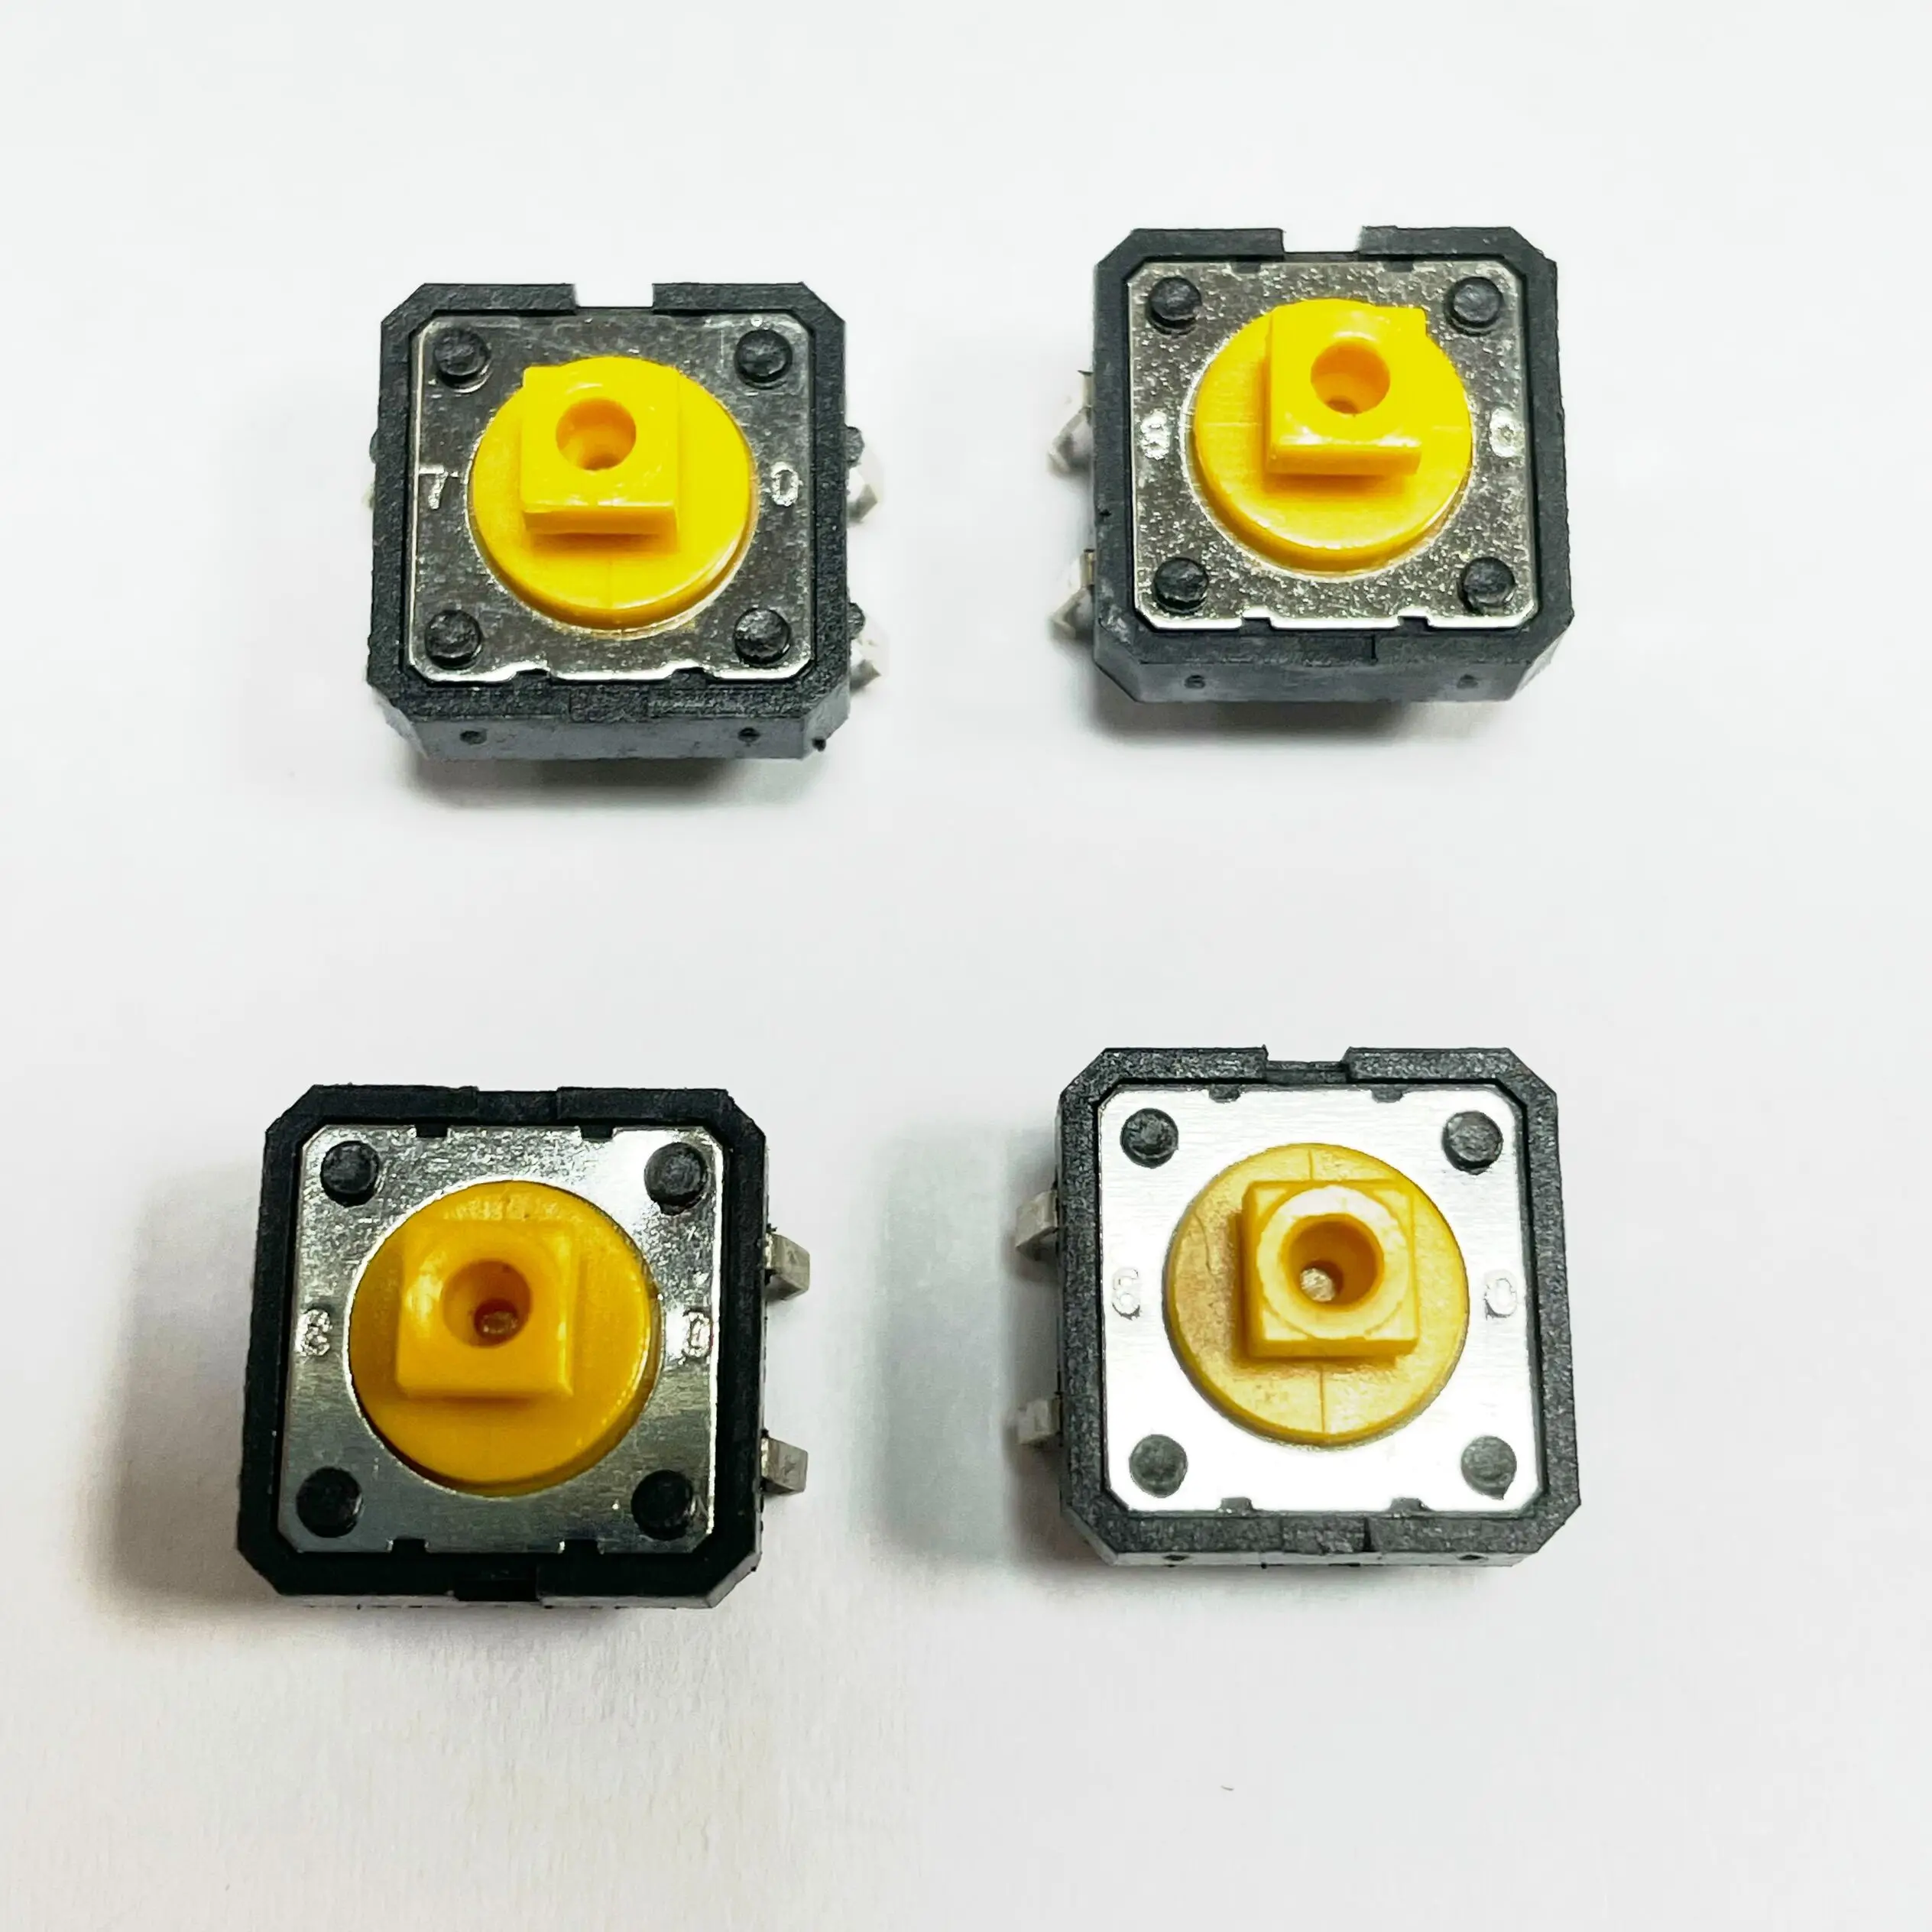 5PCS/LOT B3F-4055 12x12x7.3 mm Tactile Switches Yellow Square Push Button Tact Switch 12*12*7.3 mm Micro switch micro switch tactile push button for bmw car remote control button for benz slide switches 3 5 2 7 1 4